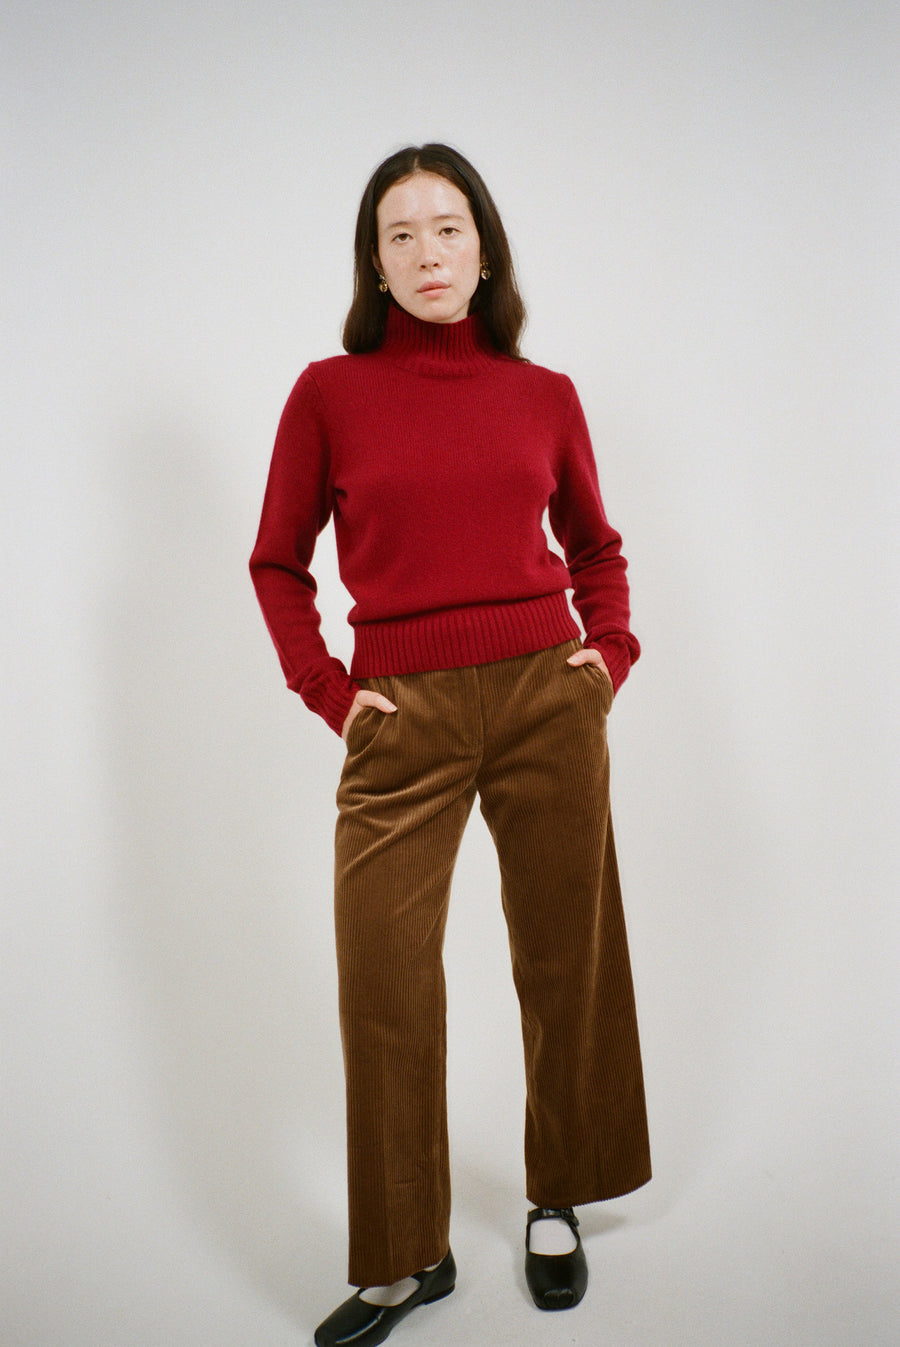 BOXY PANT IN BRUNETTE